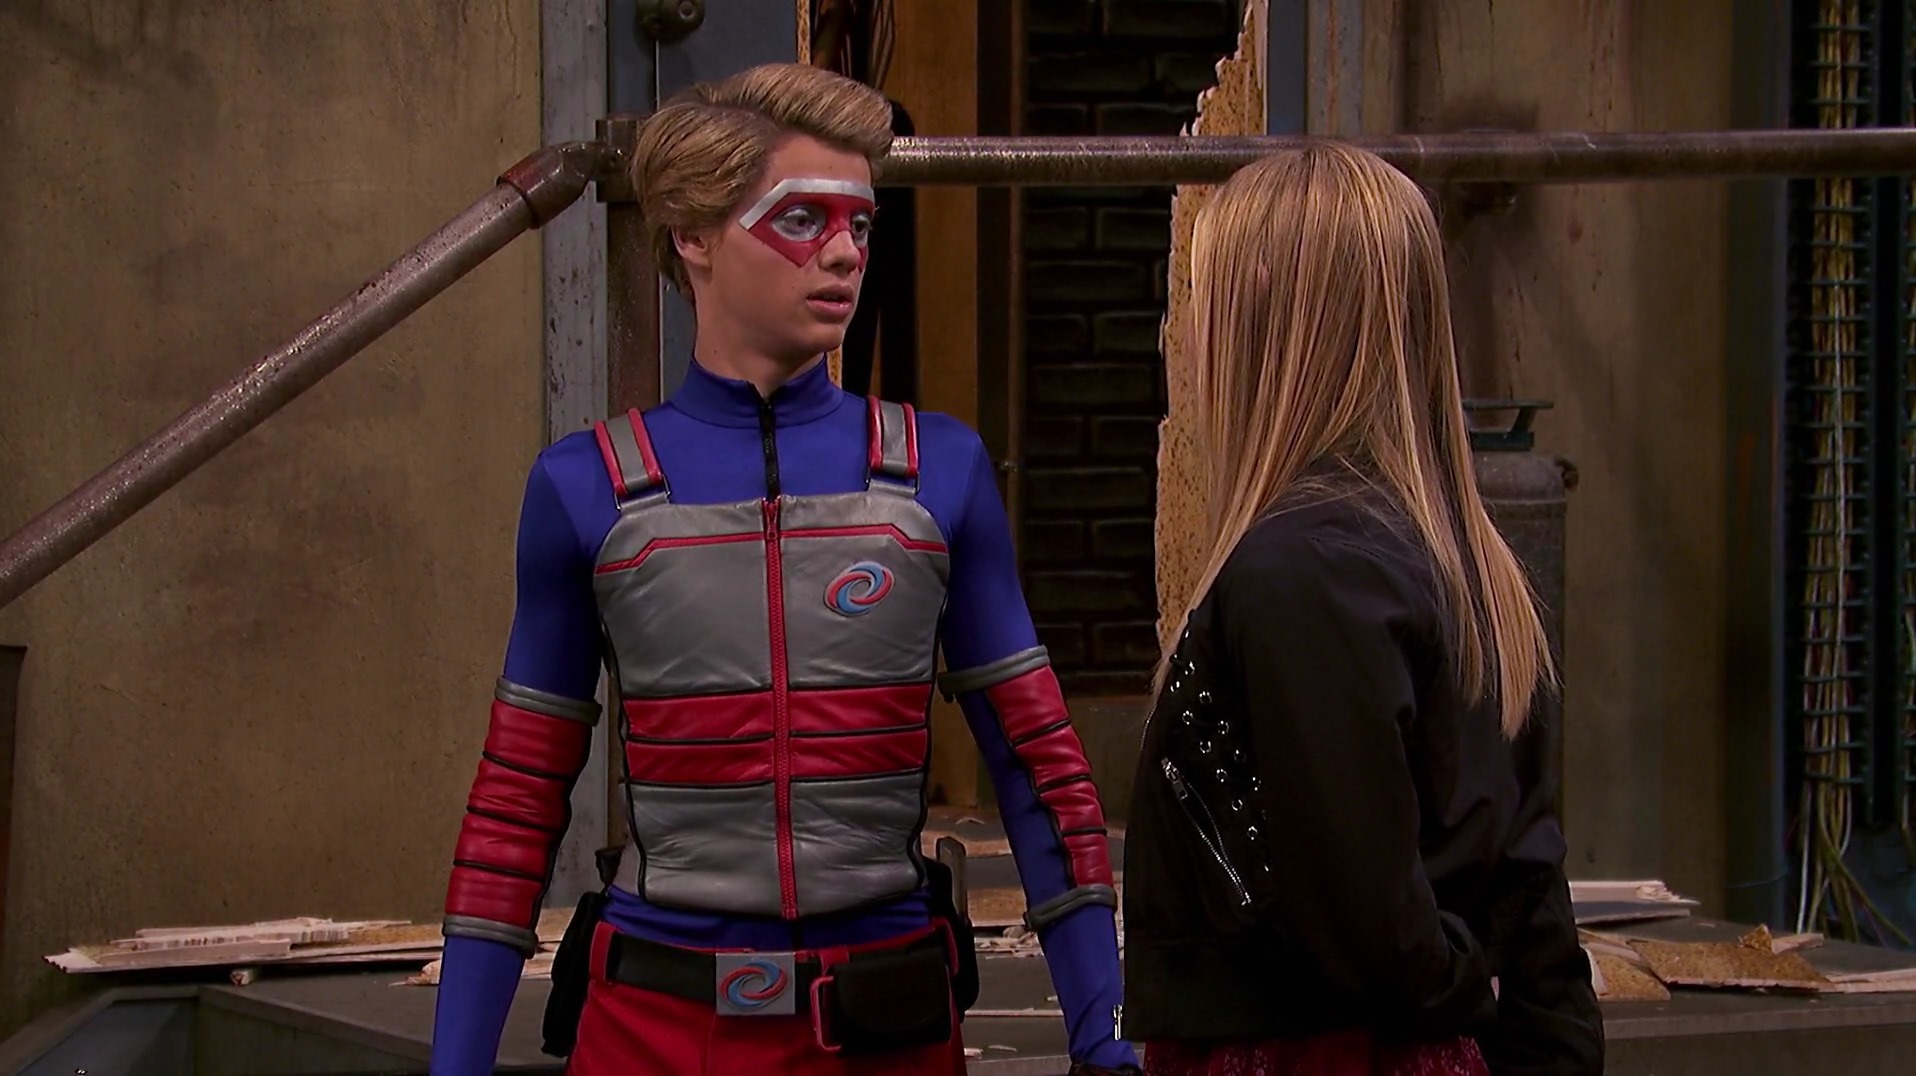 Jace Norman in Henry Danger - Picture 185 of 957. 